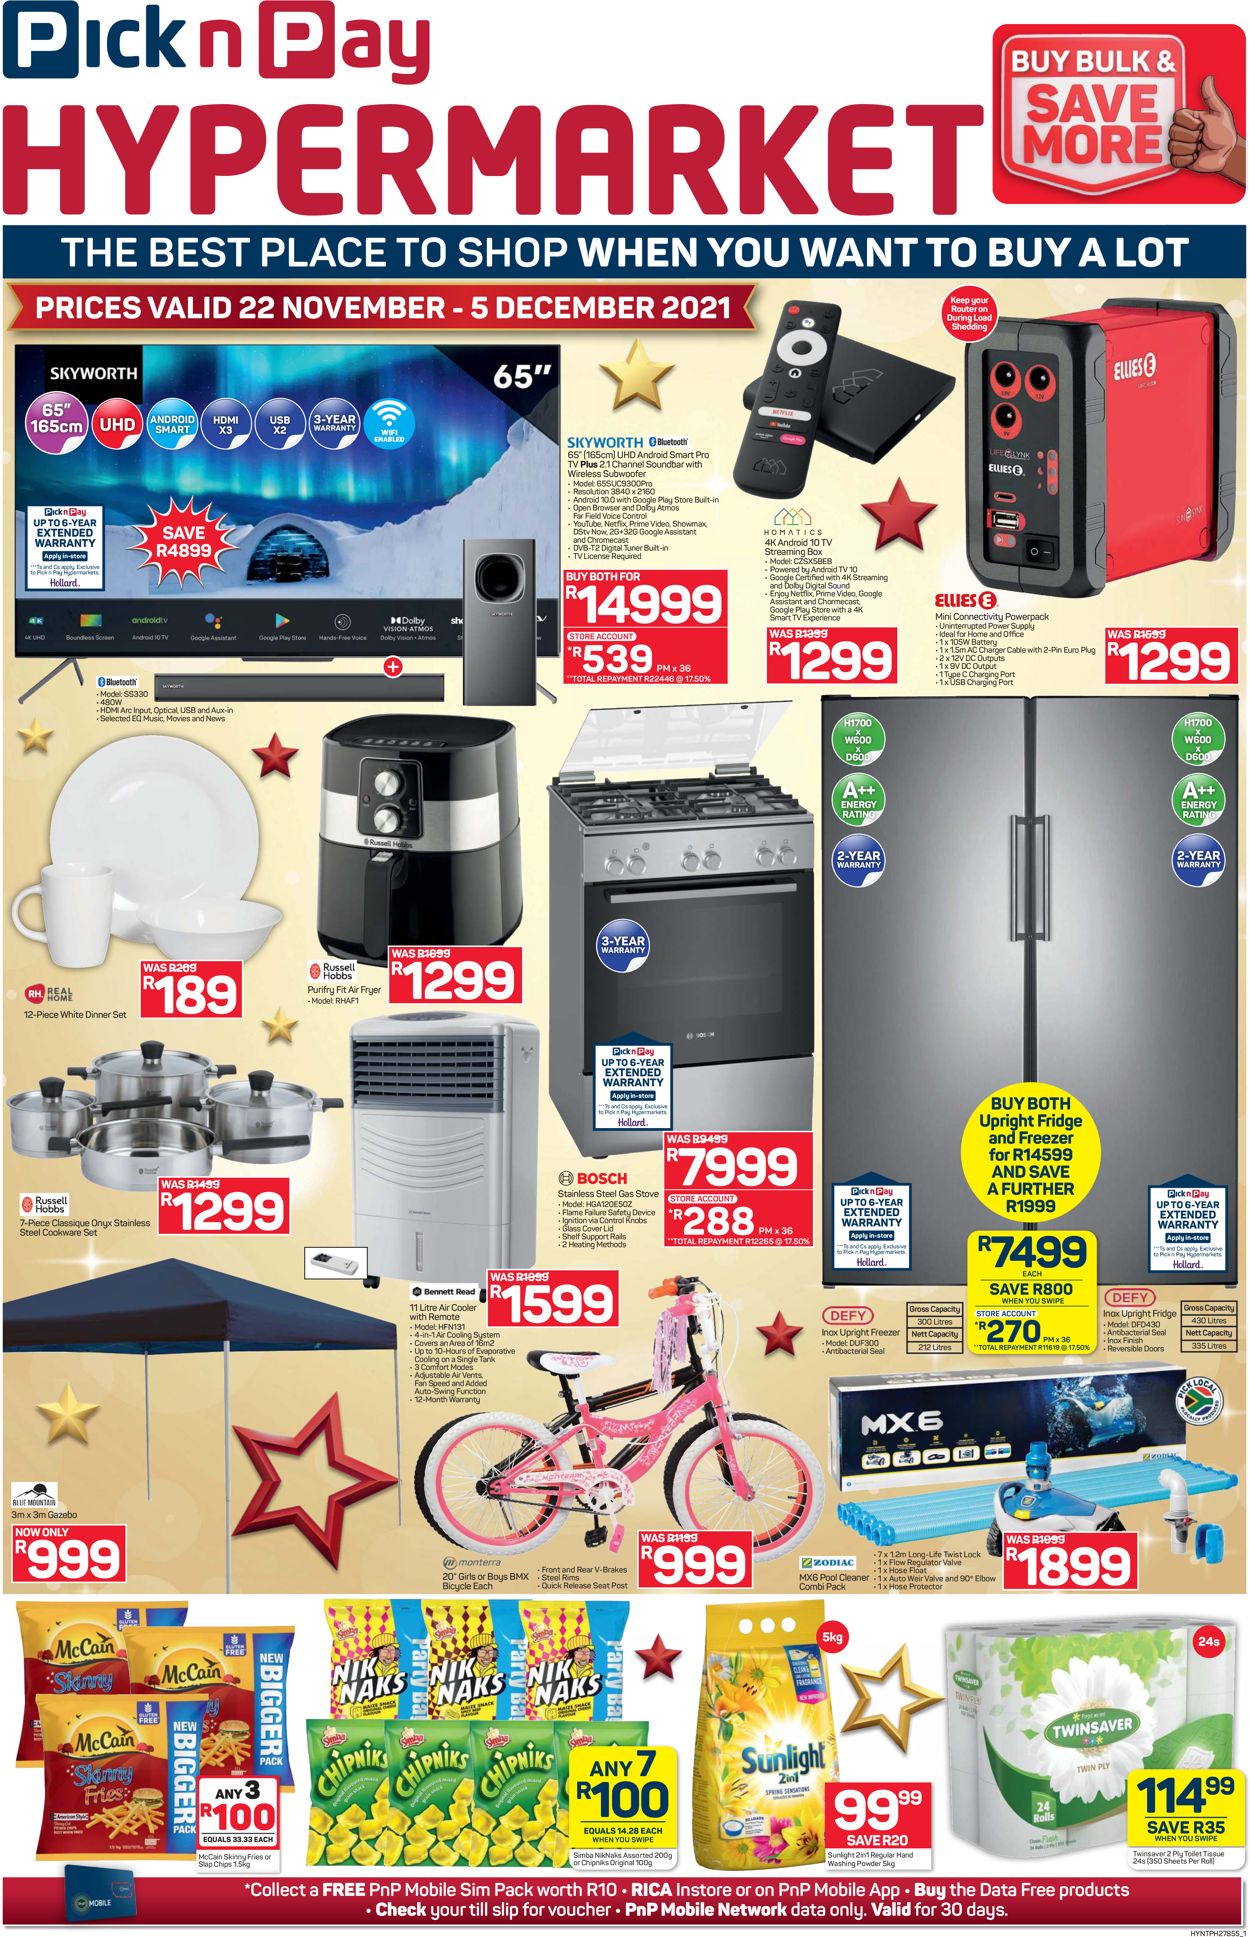 Pick n Pay CYBER MONDAY 2021 Catalogue - 2021/11/22-2021/12/05